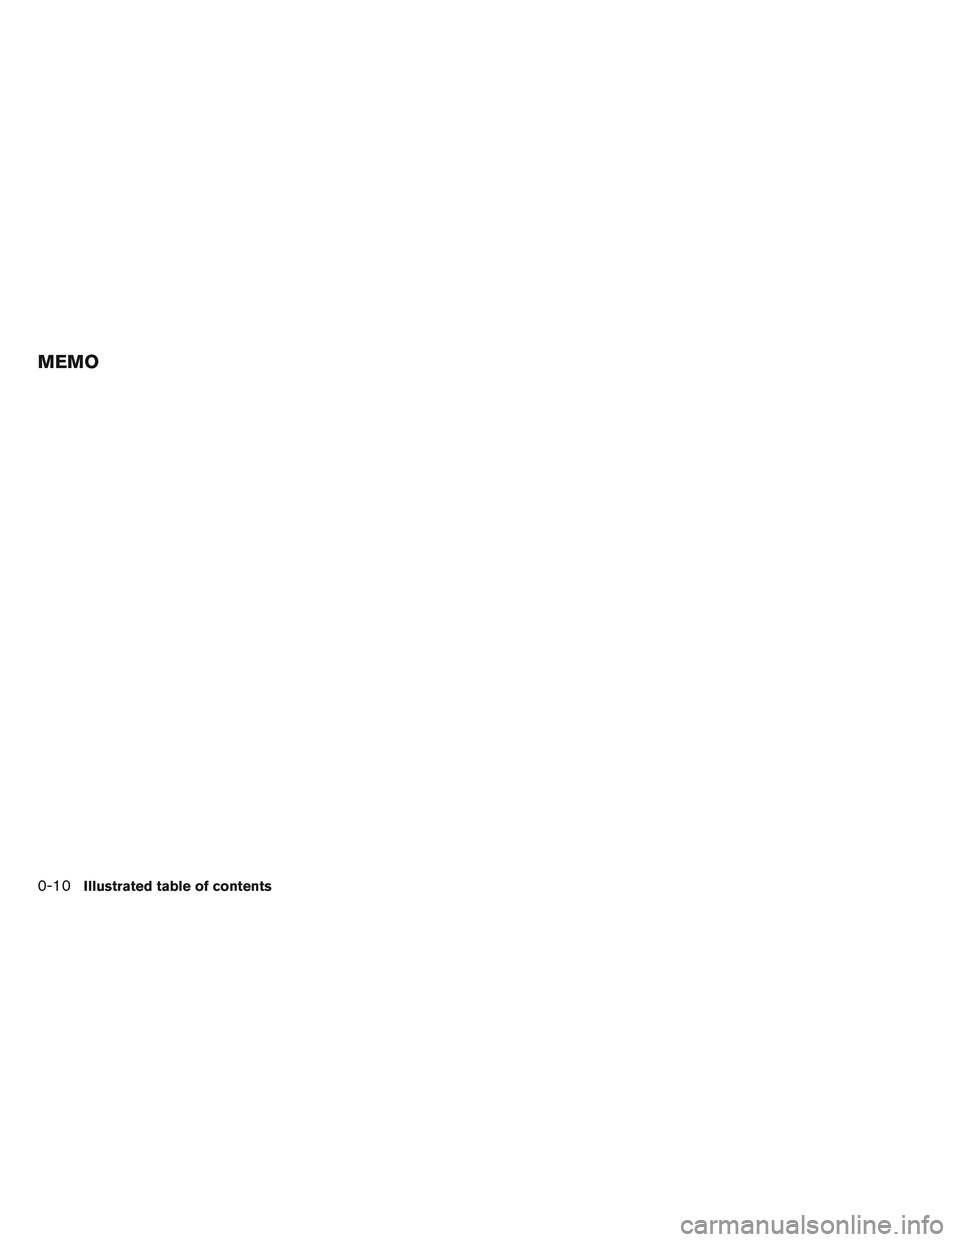 NISSAN VERSA 2013 User Guide MEMO
0-10Illustrated table of contents 